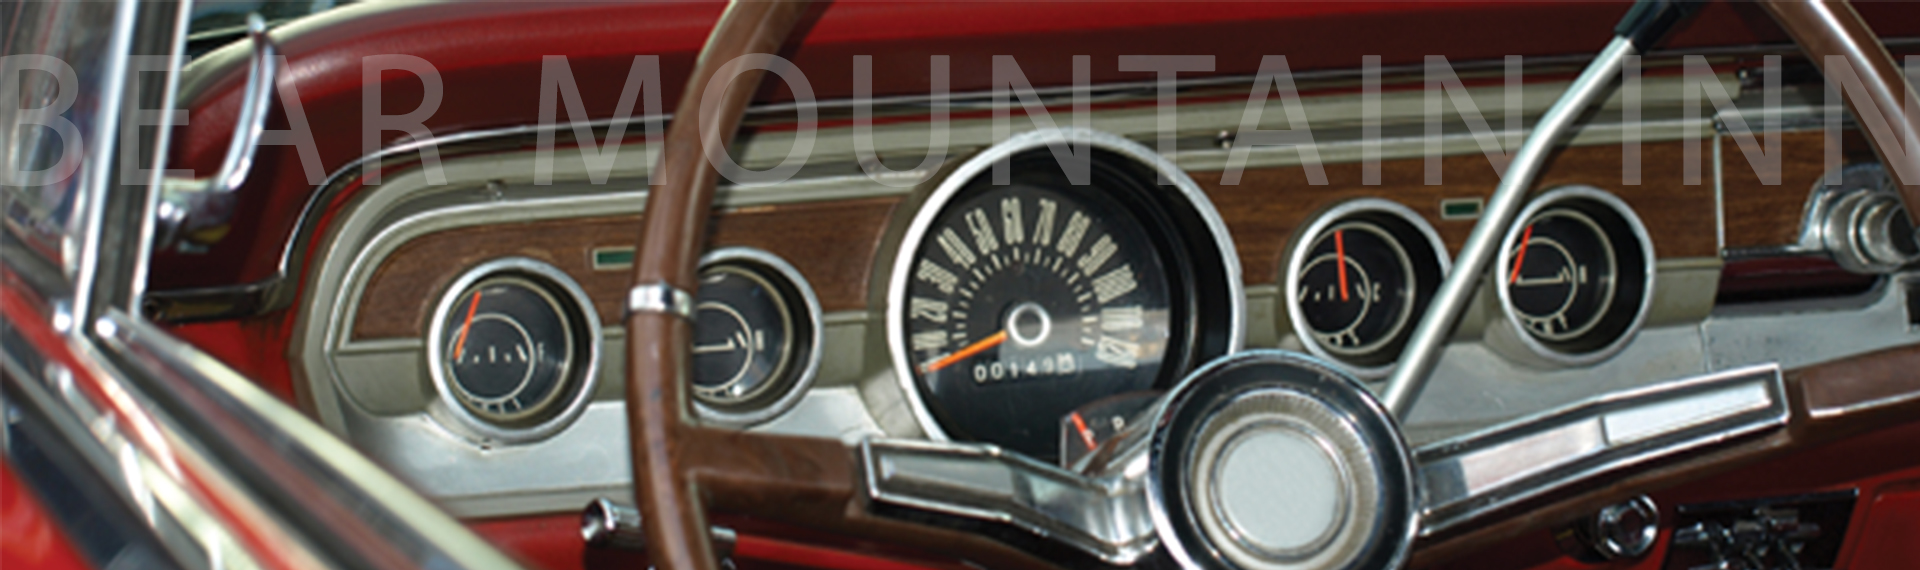 Dashboard of an old car showing the steering wheel, speedometer, and other gauges